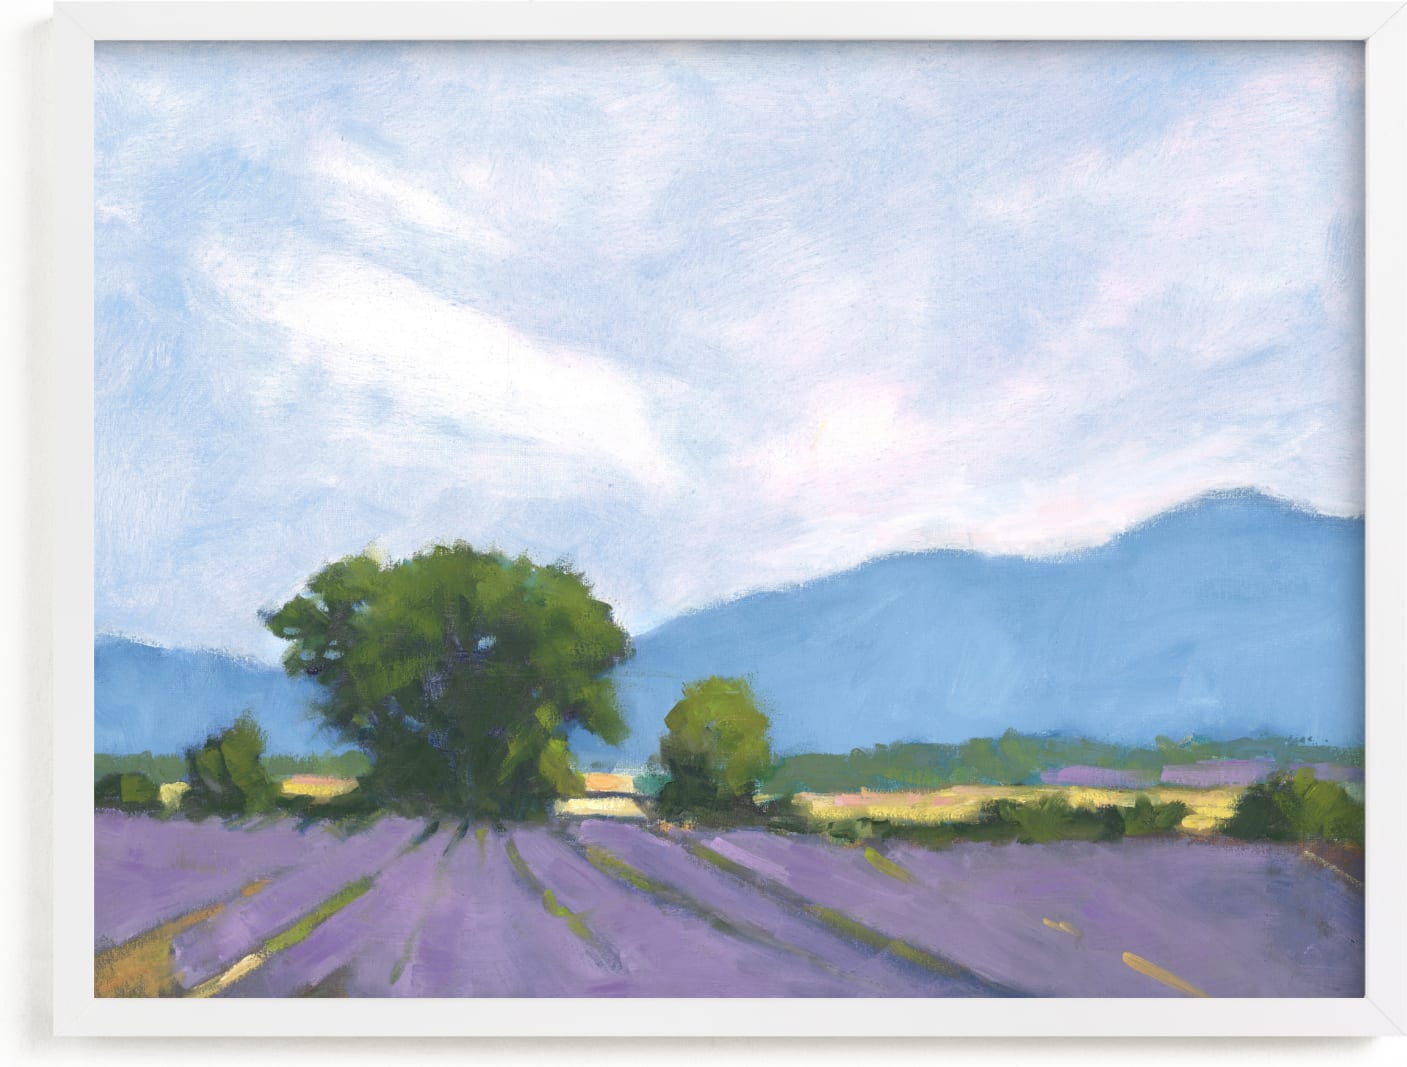 This is a blue, purple, green art by Marie Stone called Lavender Fields.